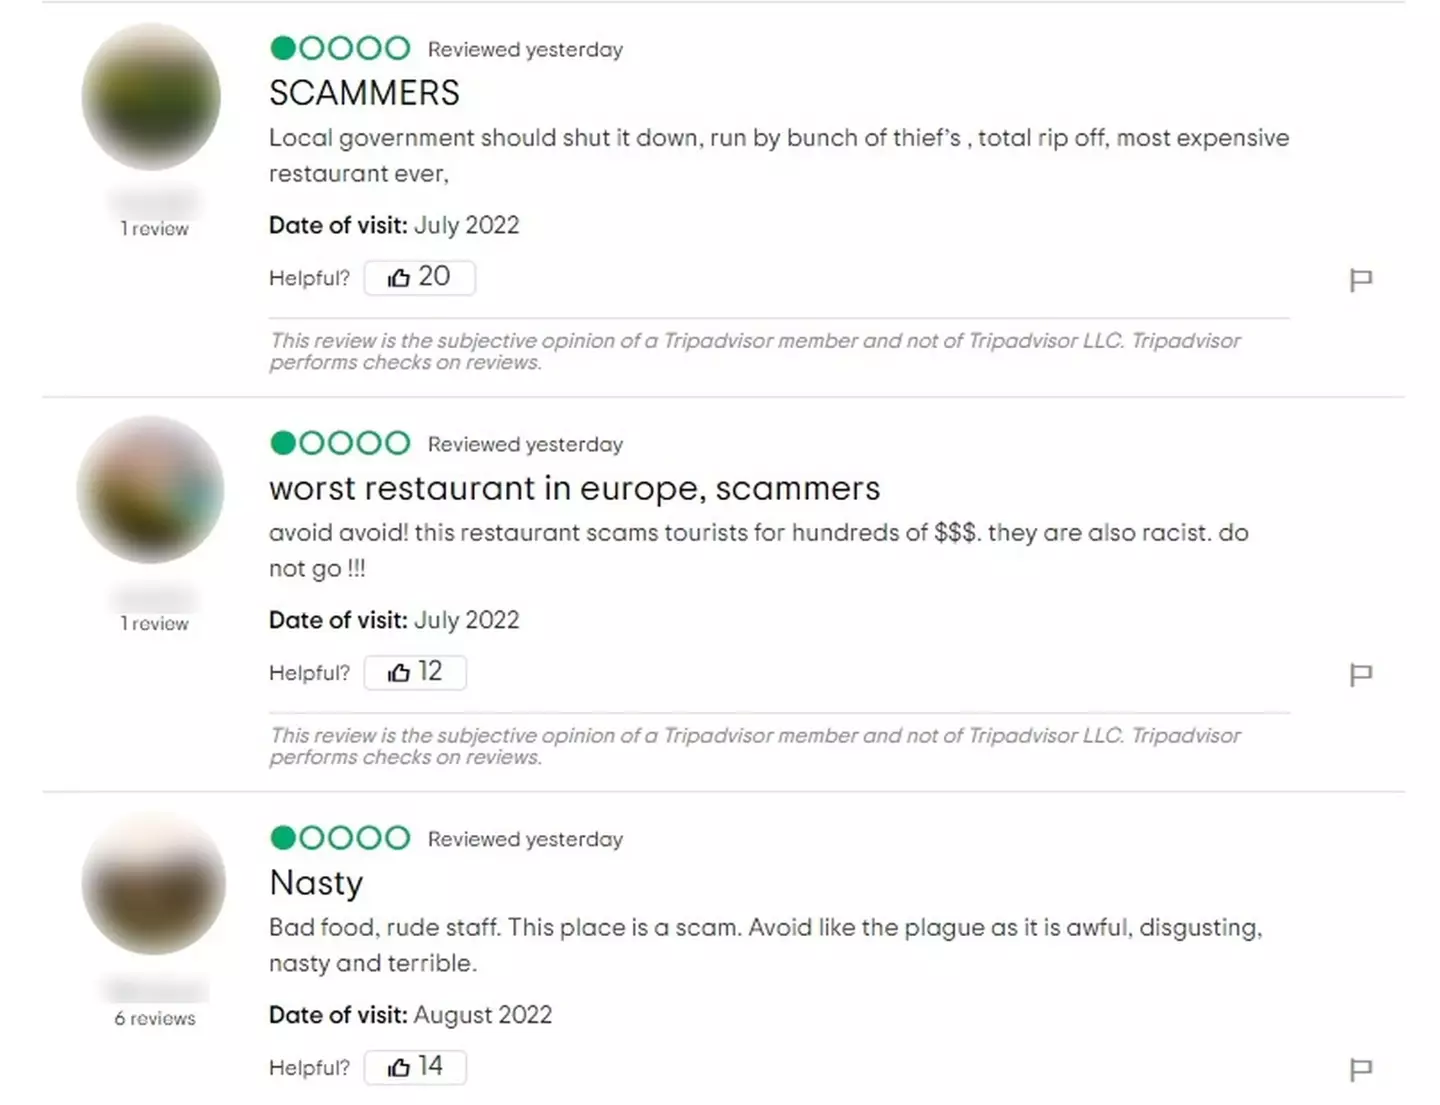 A number of reviews were submitted to Trip Advisor.